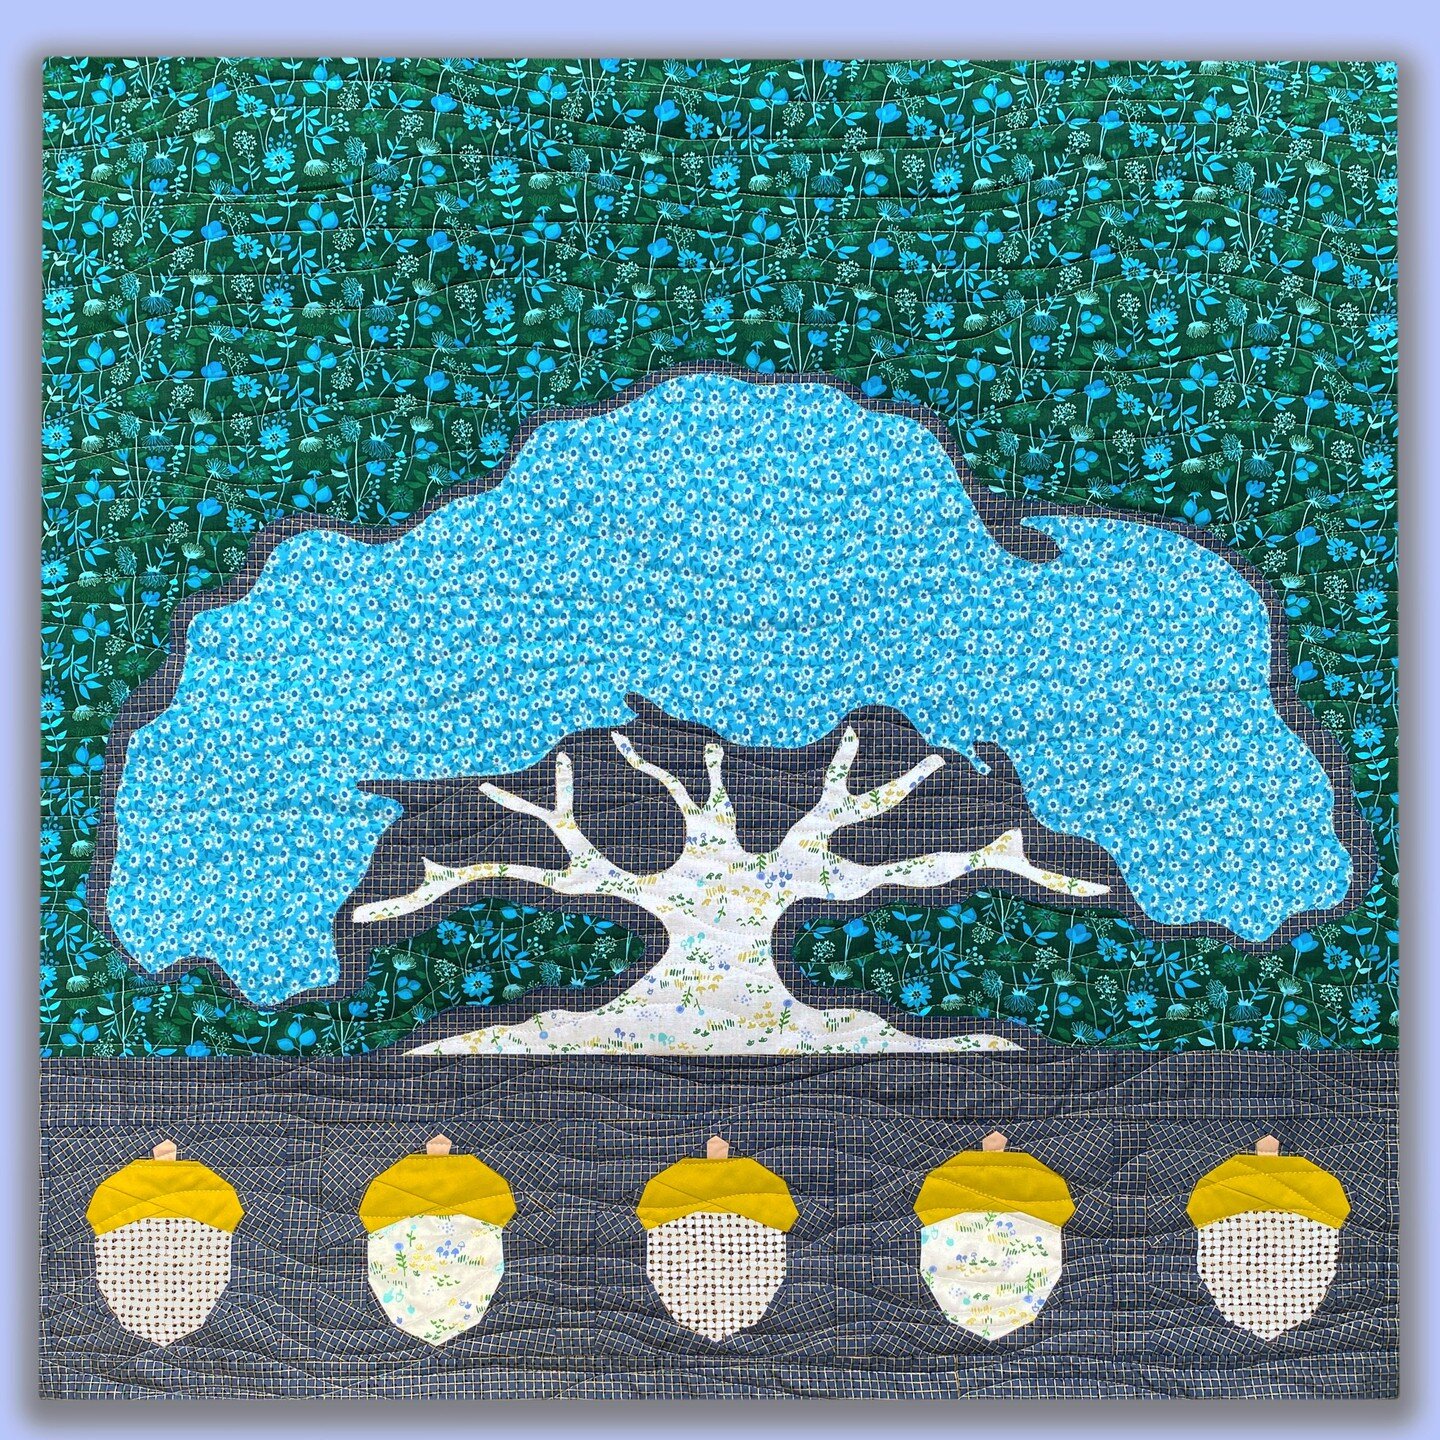 Who guessed design #5 from the previous post?
. 
Final size: 40x40
Machine applique tree and foundation paper pieced acorns using @modernquiltingbyb 's template
. 
.
.
.
#oakquilt #oaktreequilt #wallquilt #customgift #customquilt #goodquilt